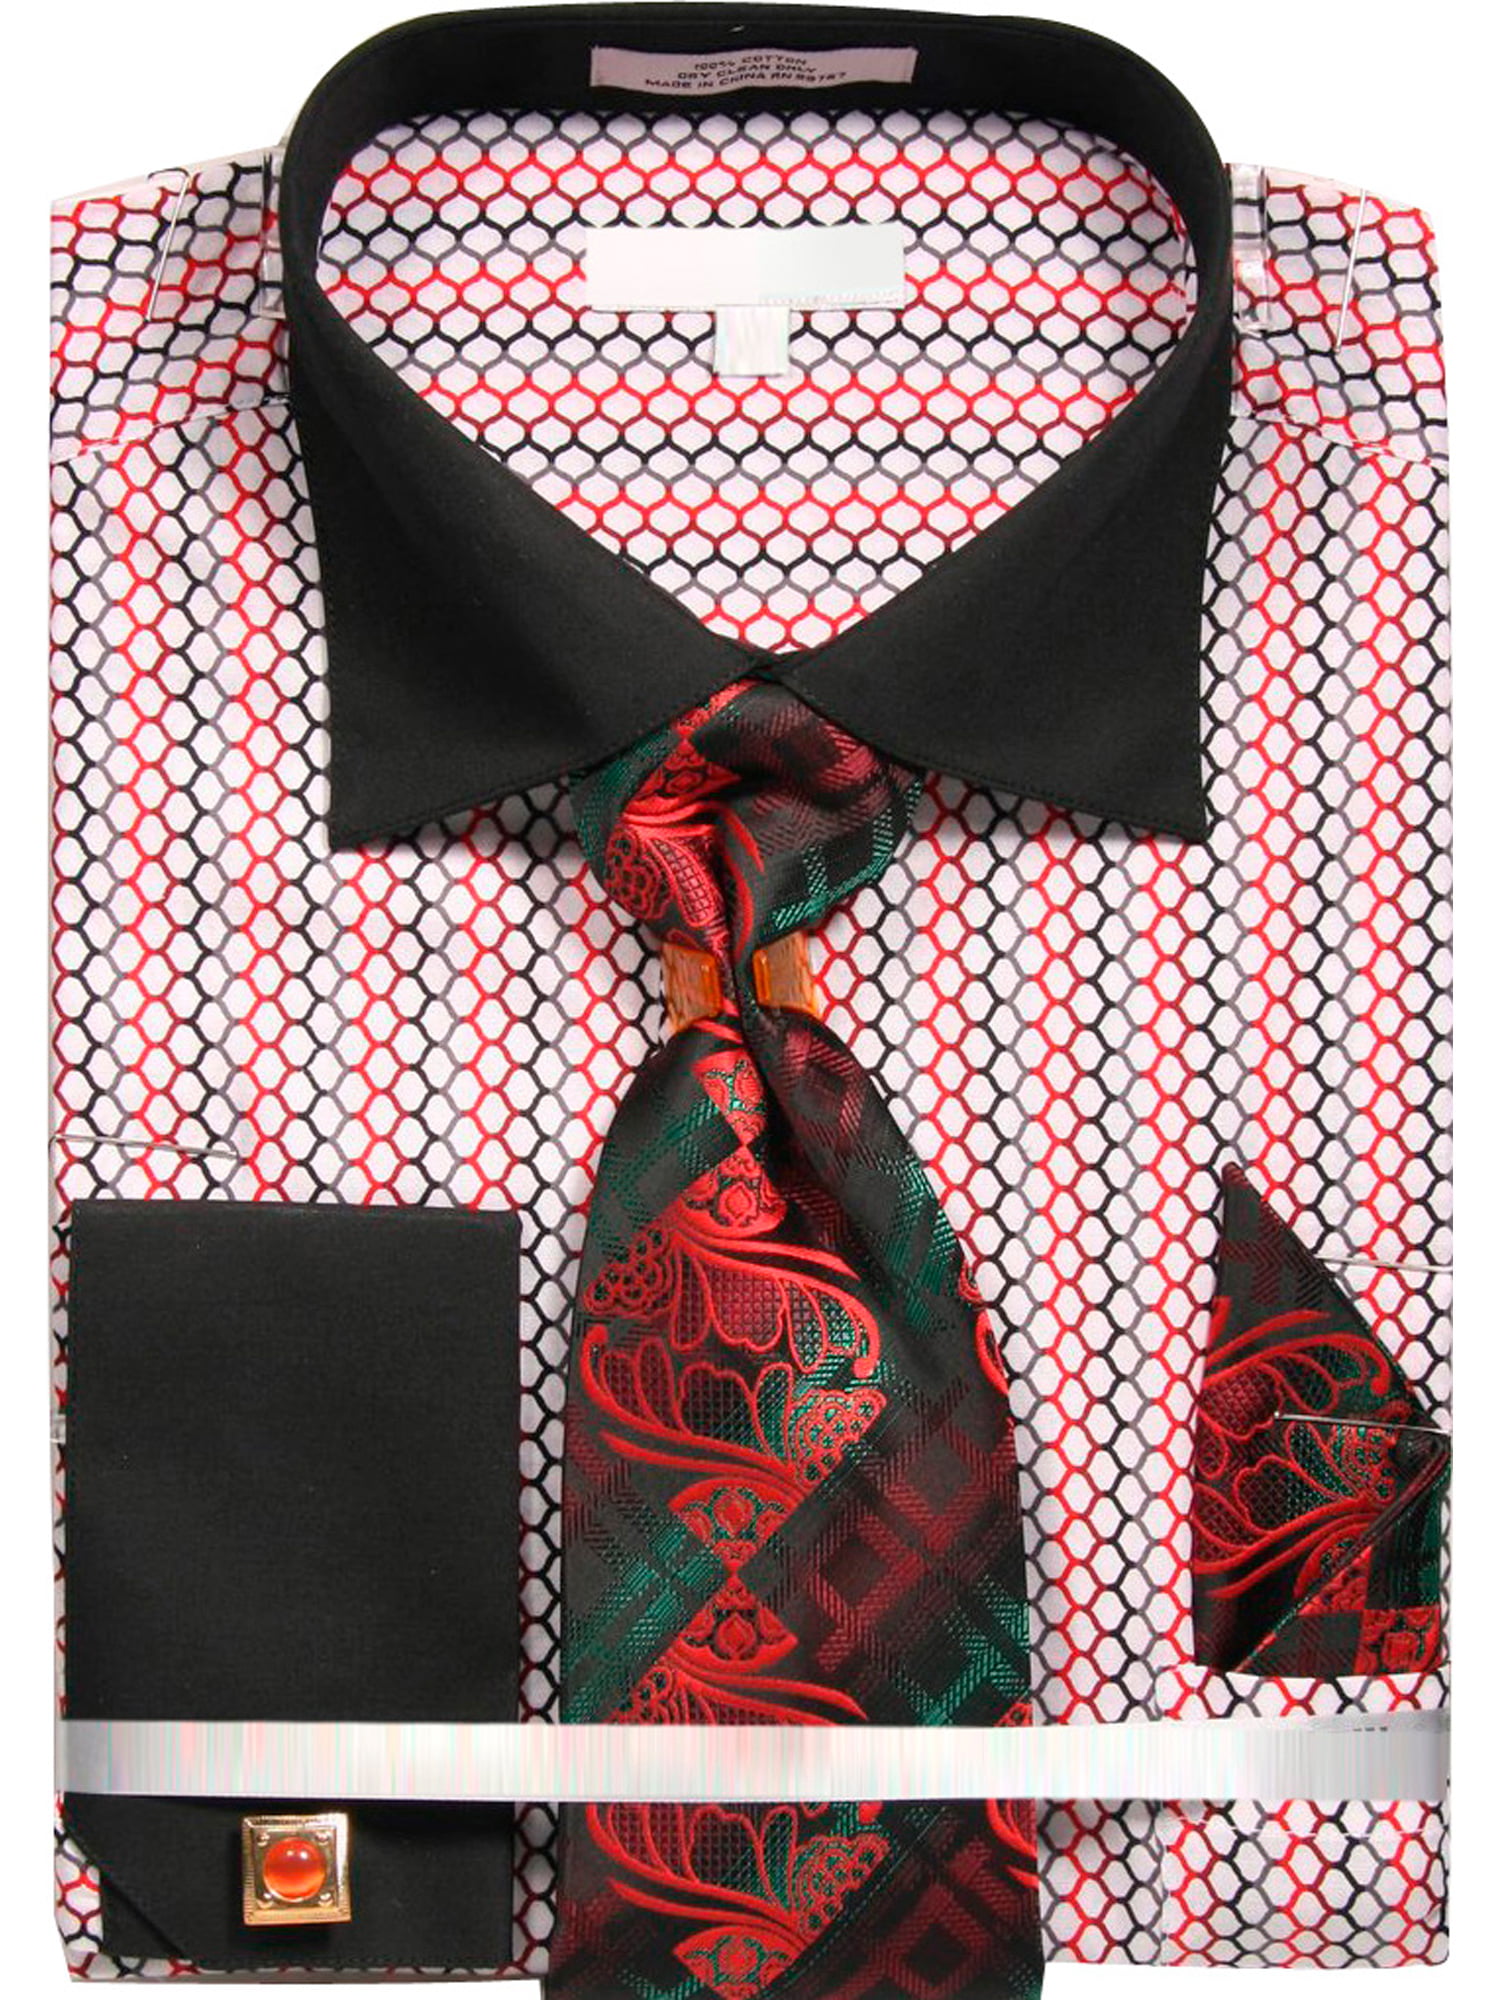 Men's Printed Honeycomb French Cuff Shirt with Tie Handkerchief ...